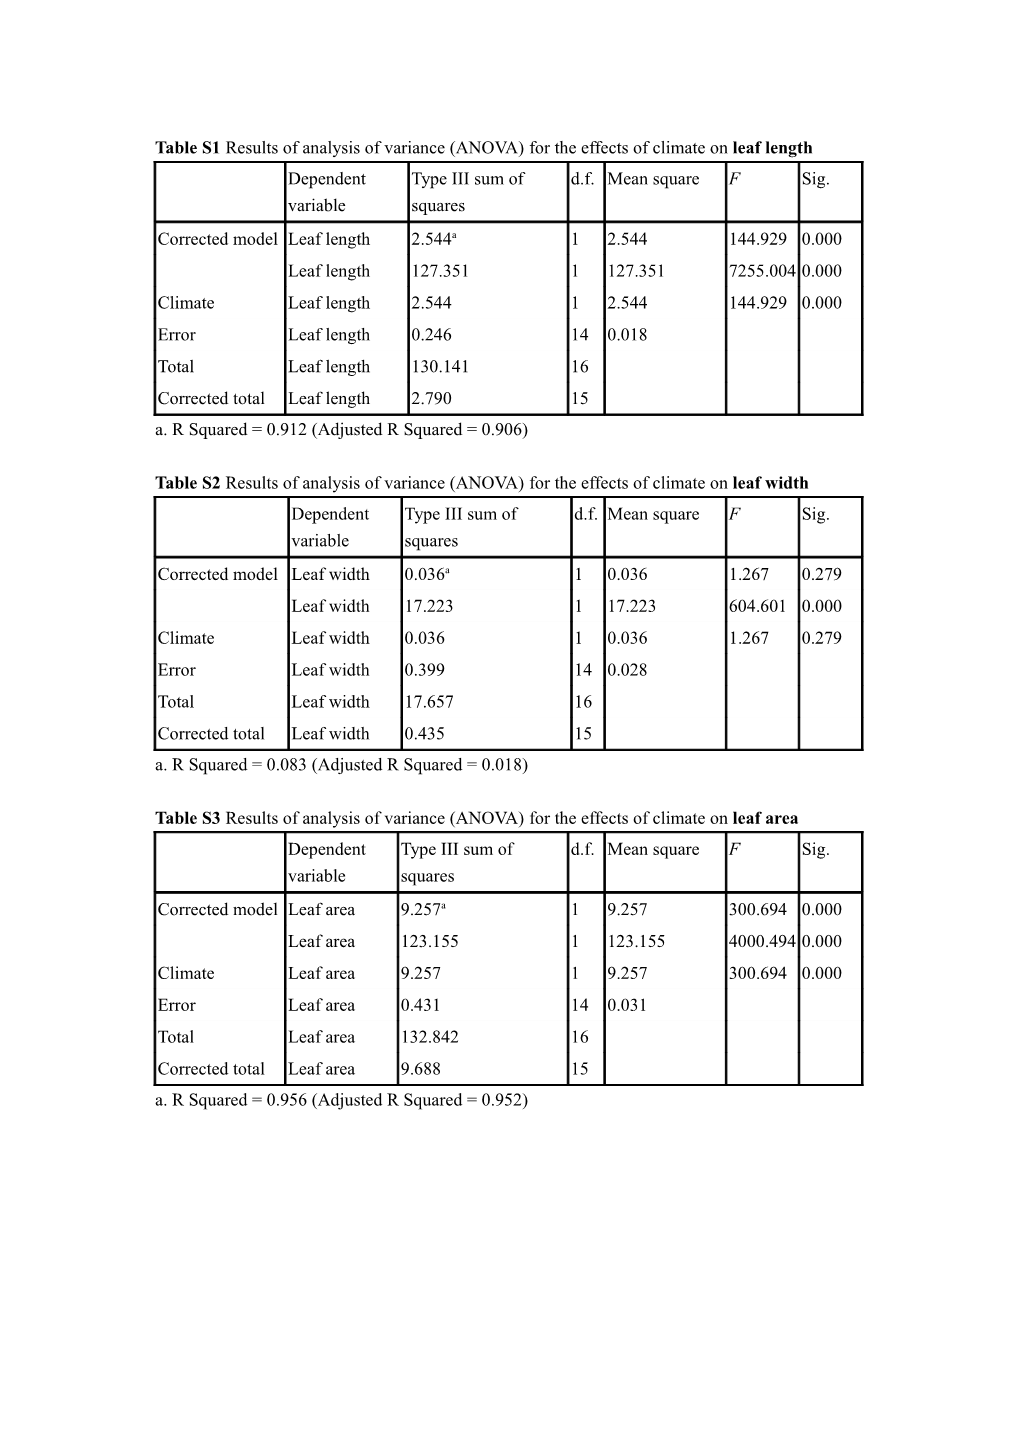 Table S1 Results of Analysis of Variance (ANOVA) for the Effects of Climate on Leaf Length